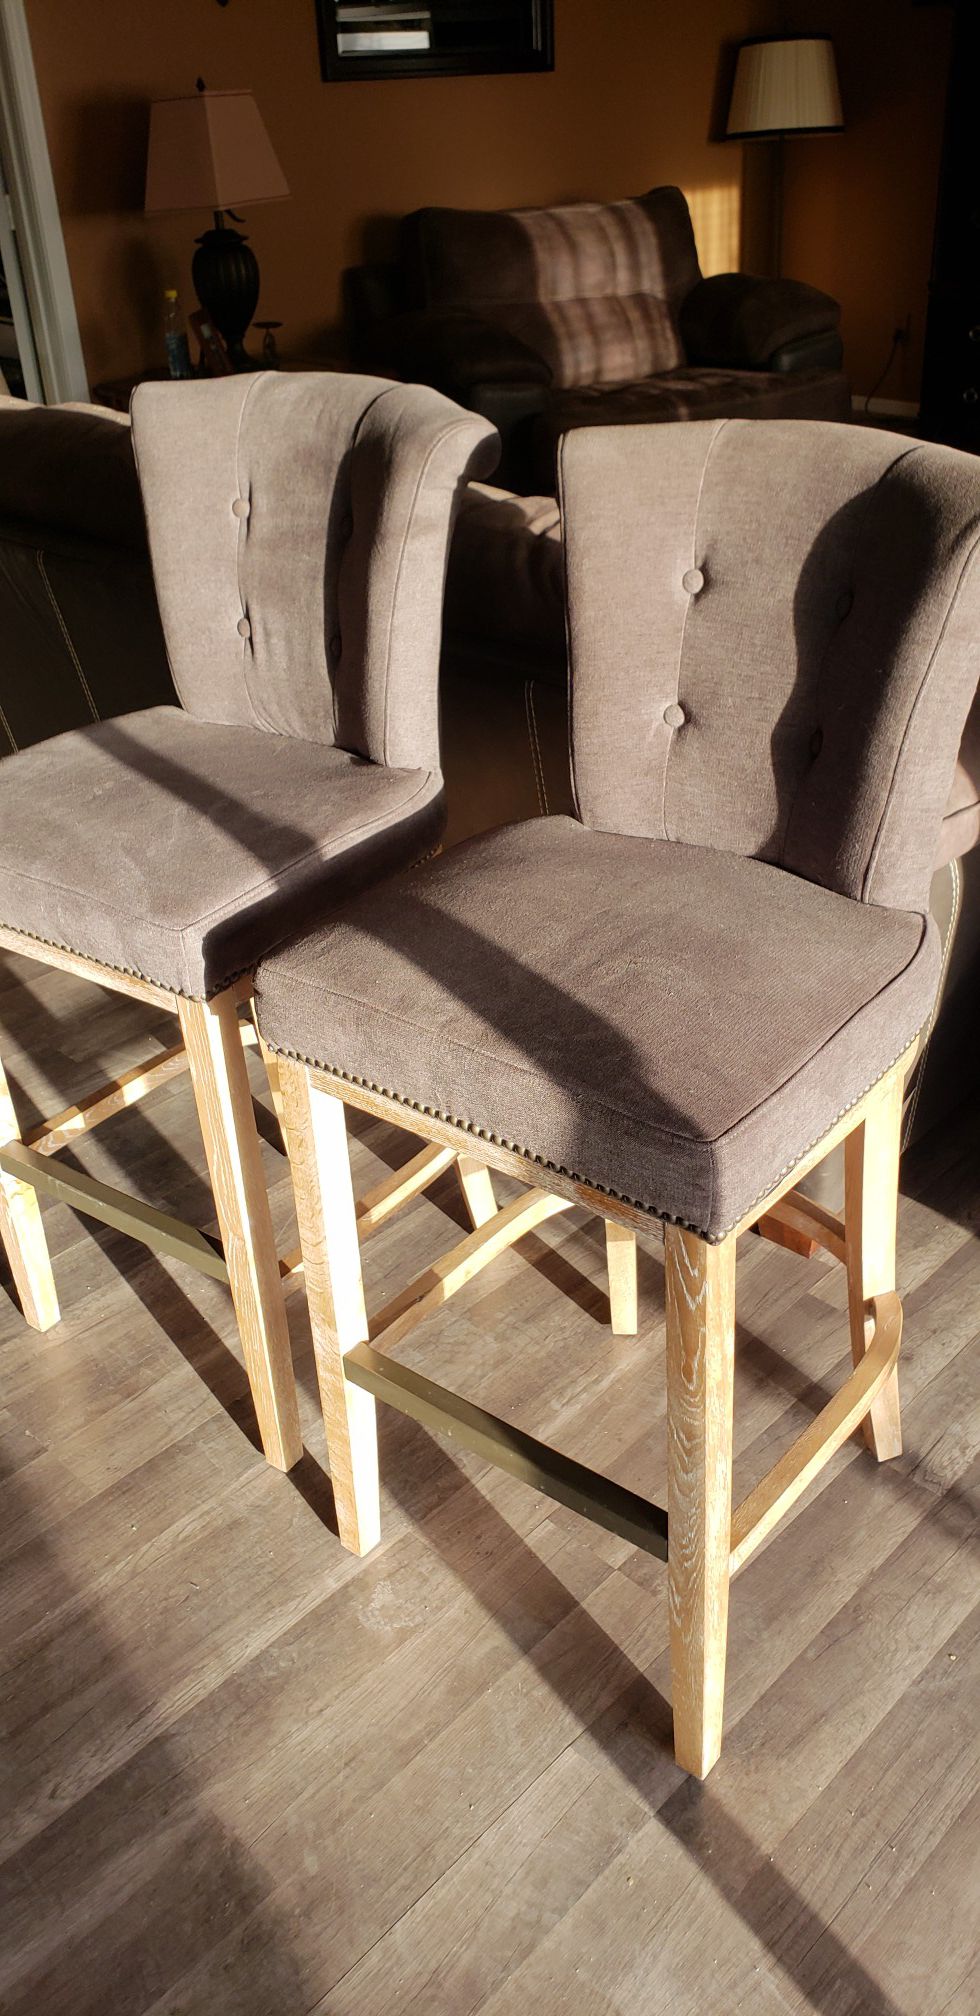 2 bar stools 29" from floor To seat...fabric grey